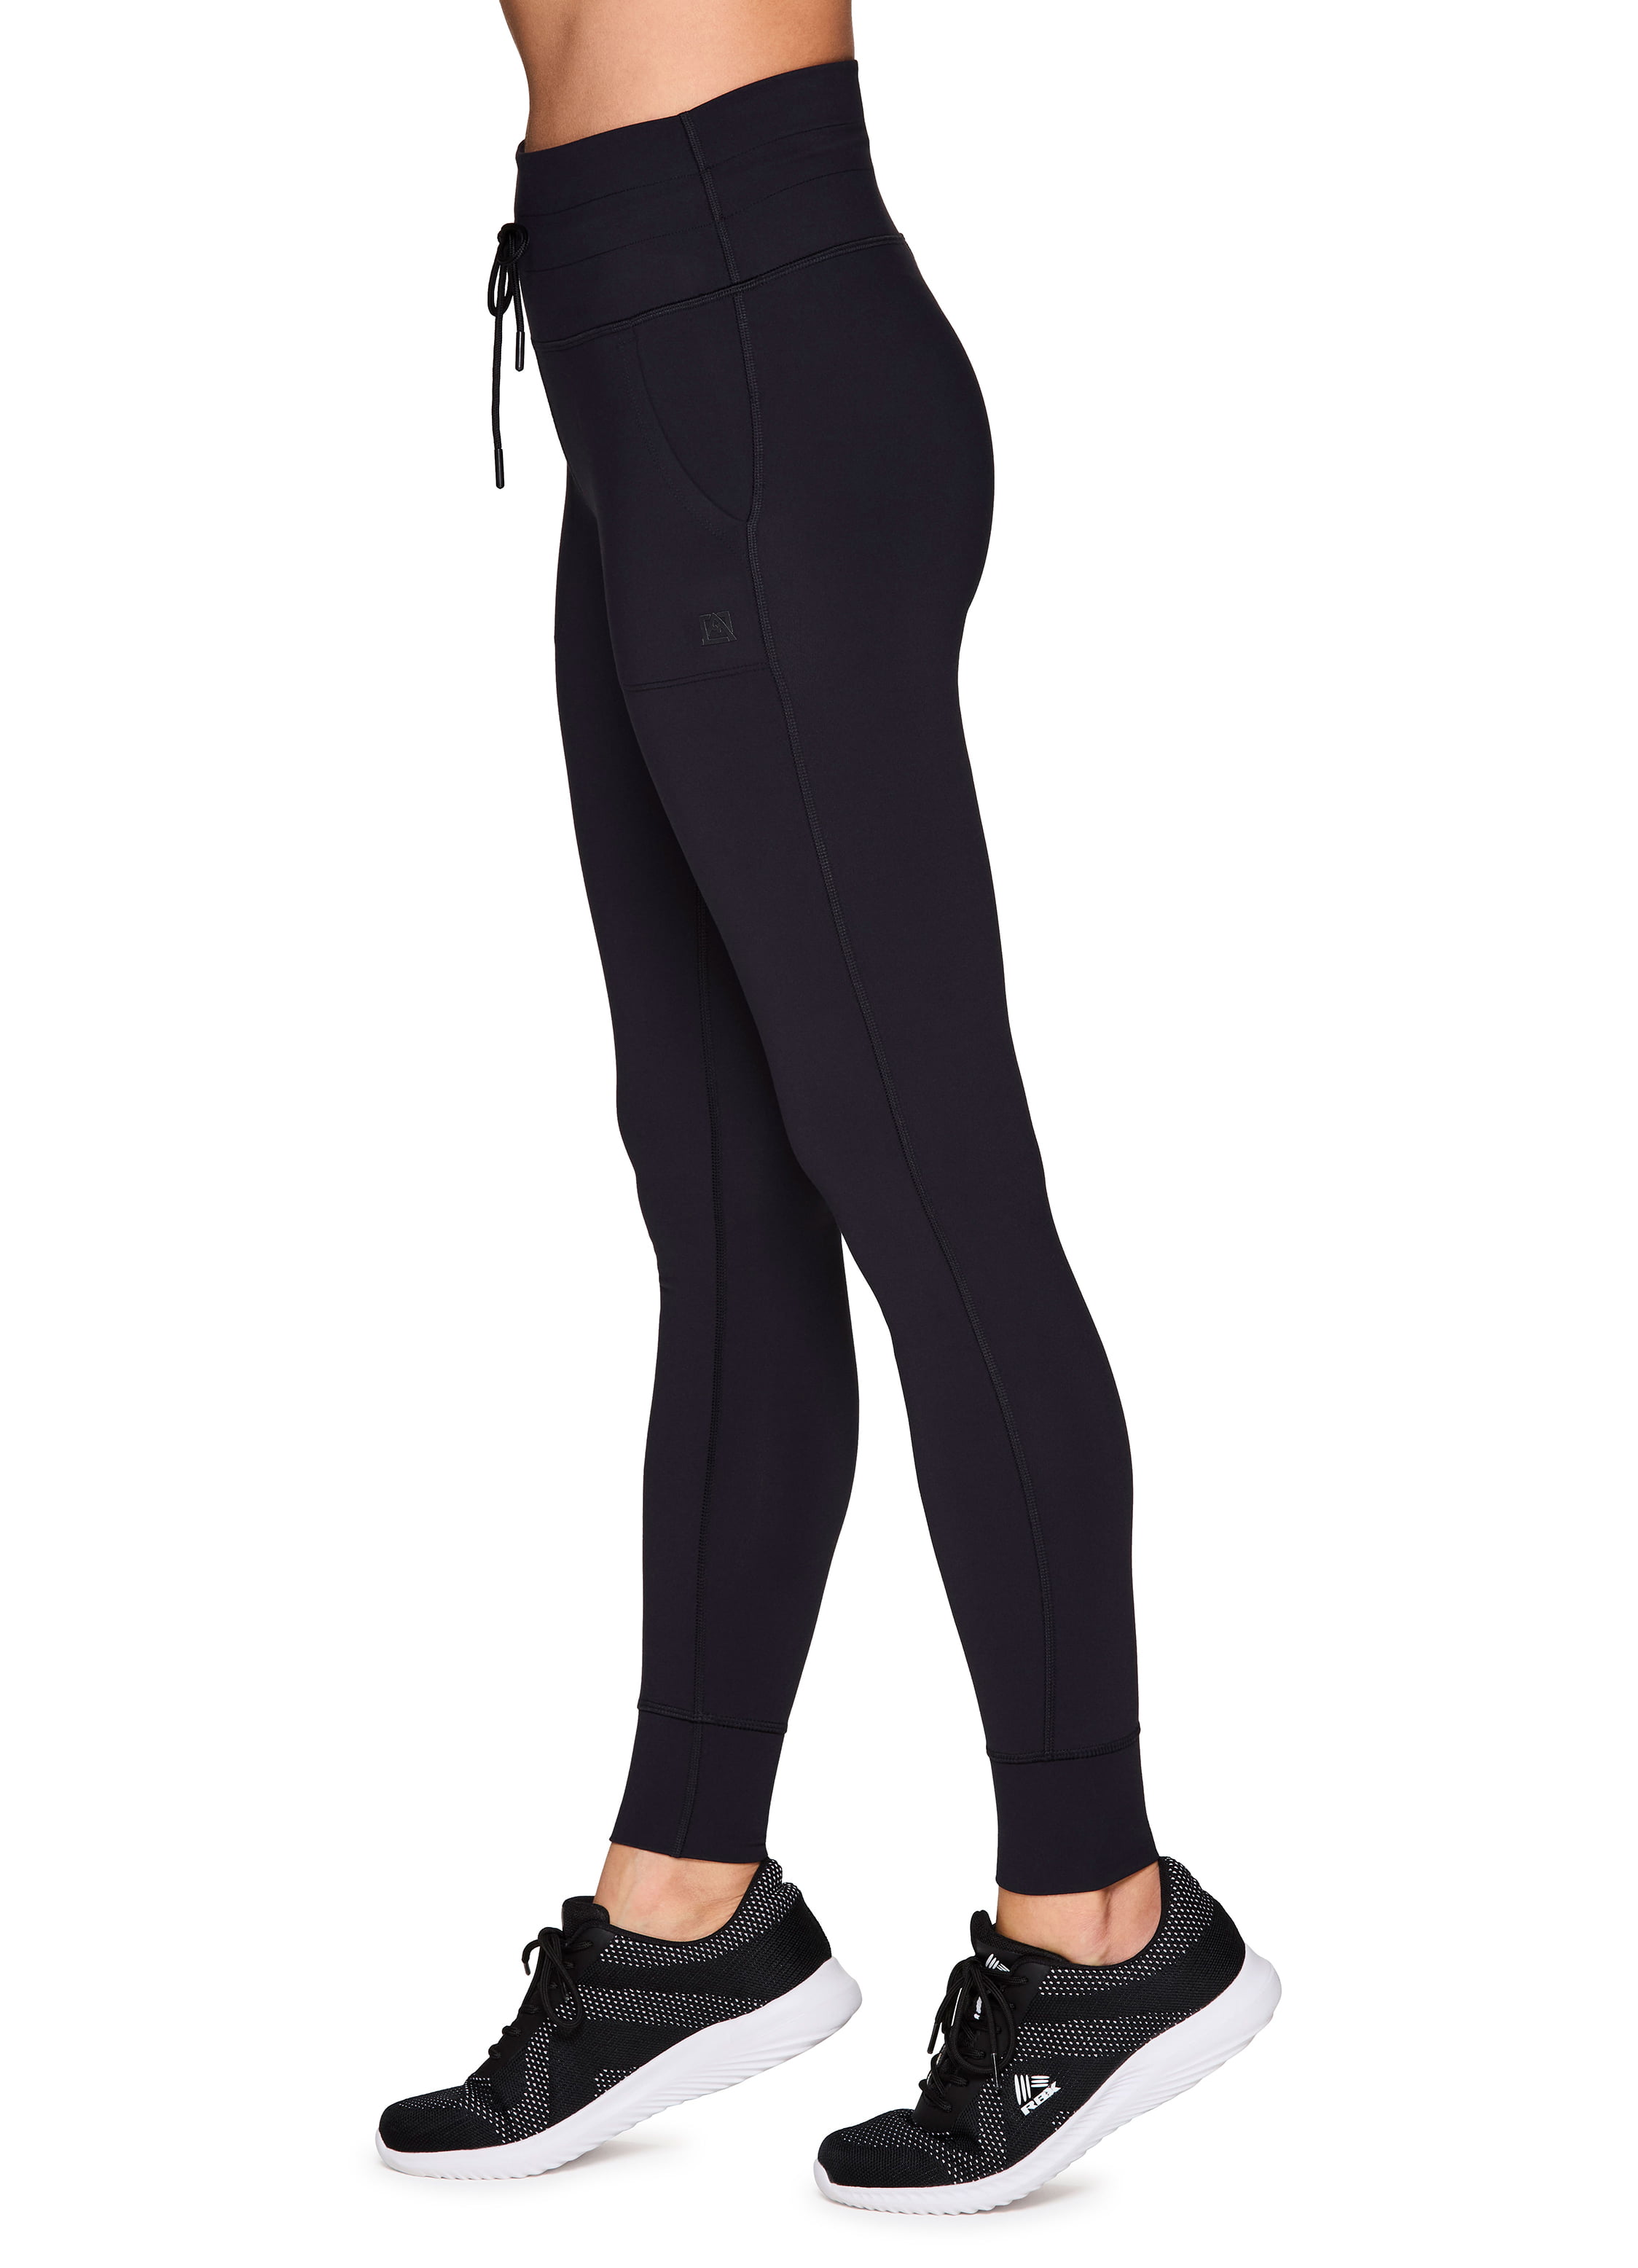 Avalanche Outdoor Athletic Leggings for Women